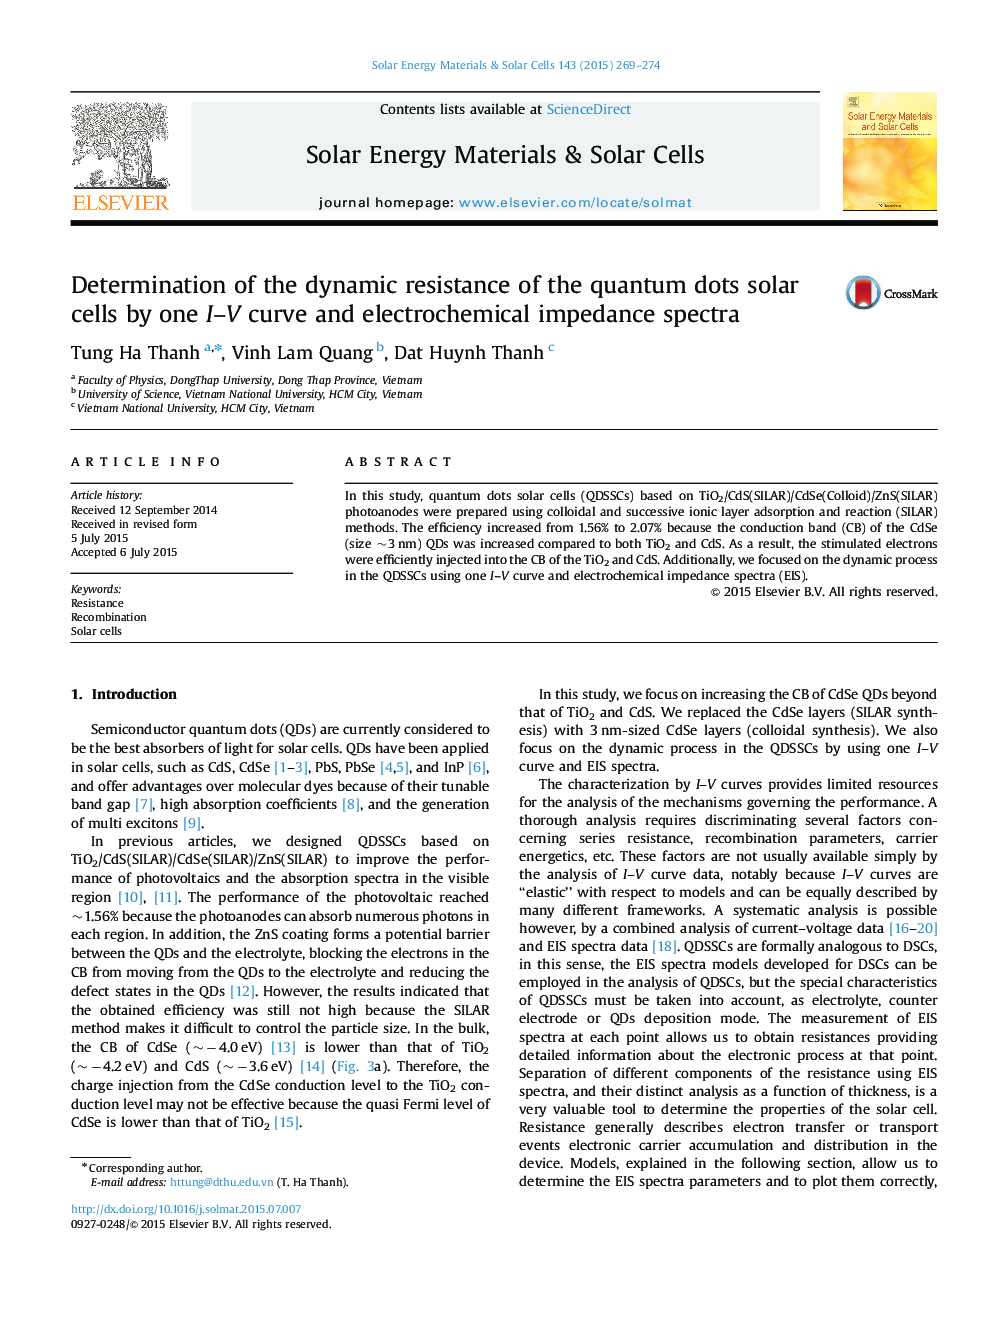 Determination of the dynamic resistance of the quantum dots solar cells by one I-V curve and electrochemical impedance spectra